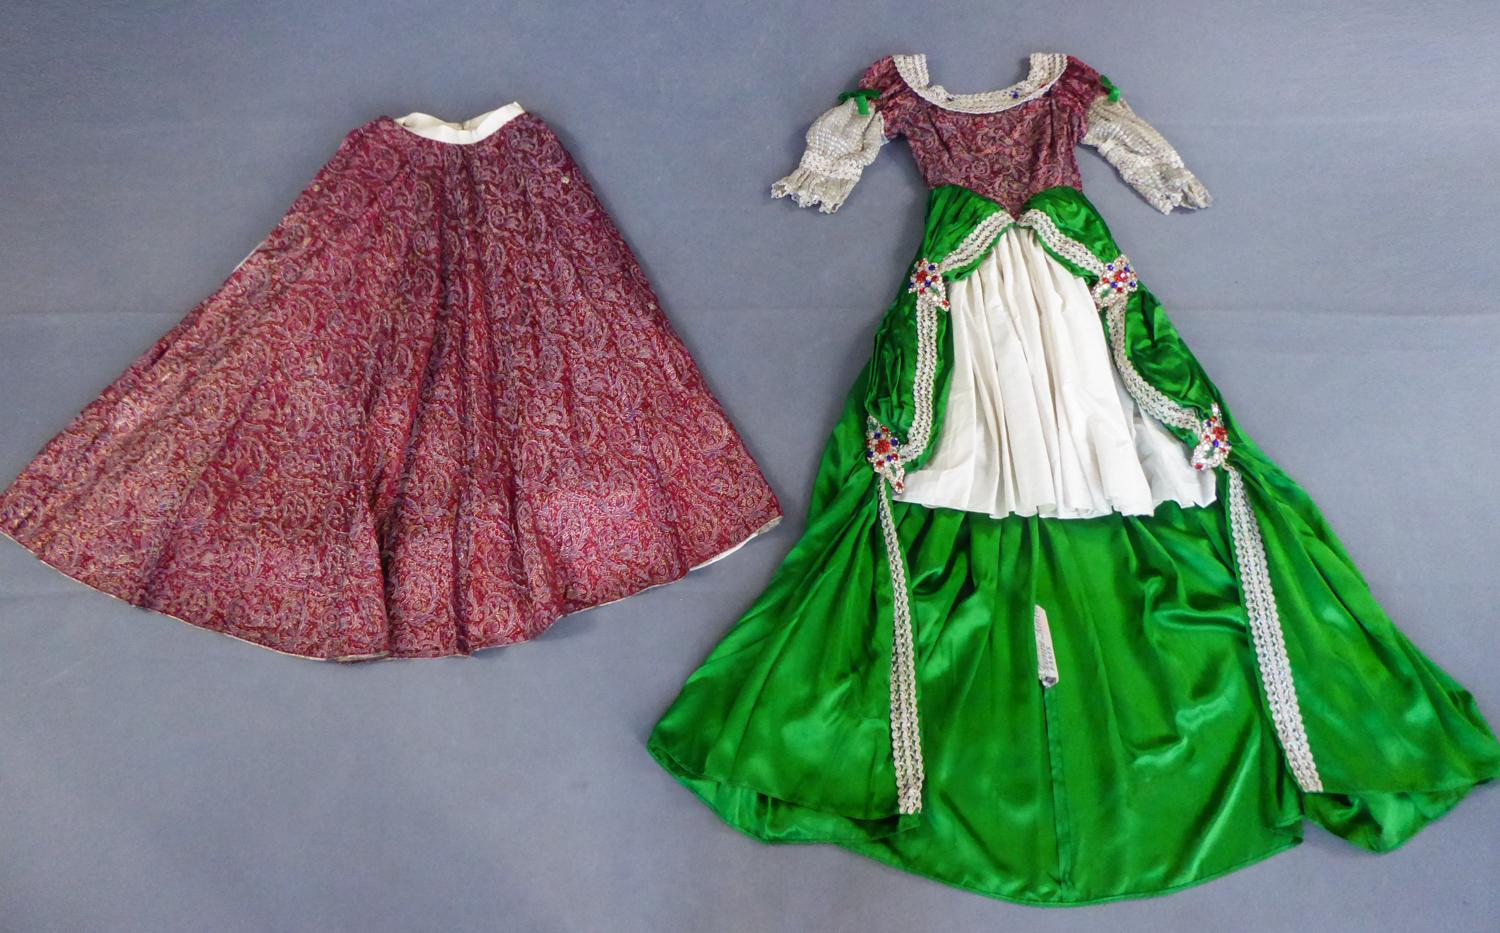 Summer Collection 1939
Paris France 

A Fancy or Masquerade historical Court dress in the taste of Louis XIII french style. Mantle-dress and skirt in emerald green satin and carmin and gold lamé brocade with striped paisley boteh motifs. Trimmings